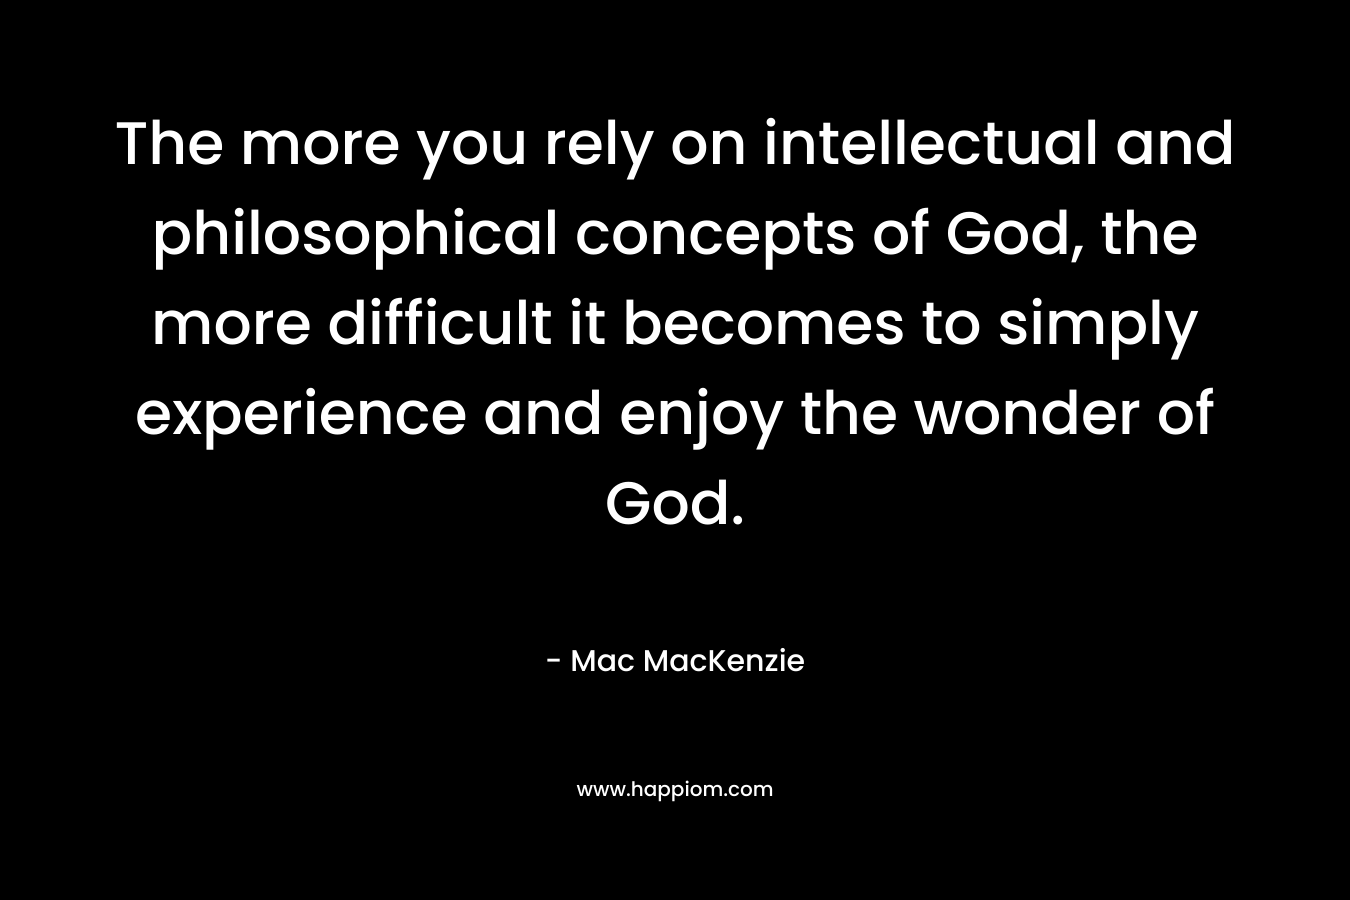 The more you rely on intellectual and philosophical concepts of God, the more difficult it becomes to simply experience and enjoy the wonder of God. – Mac MacKenzie